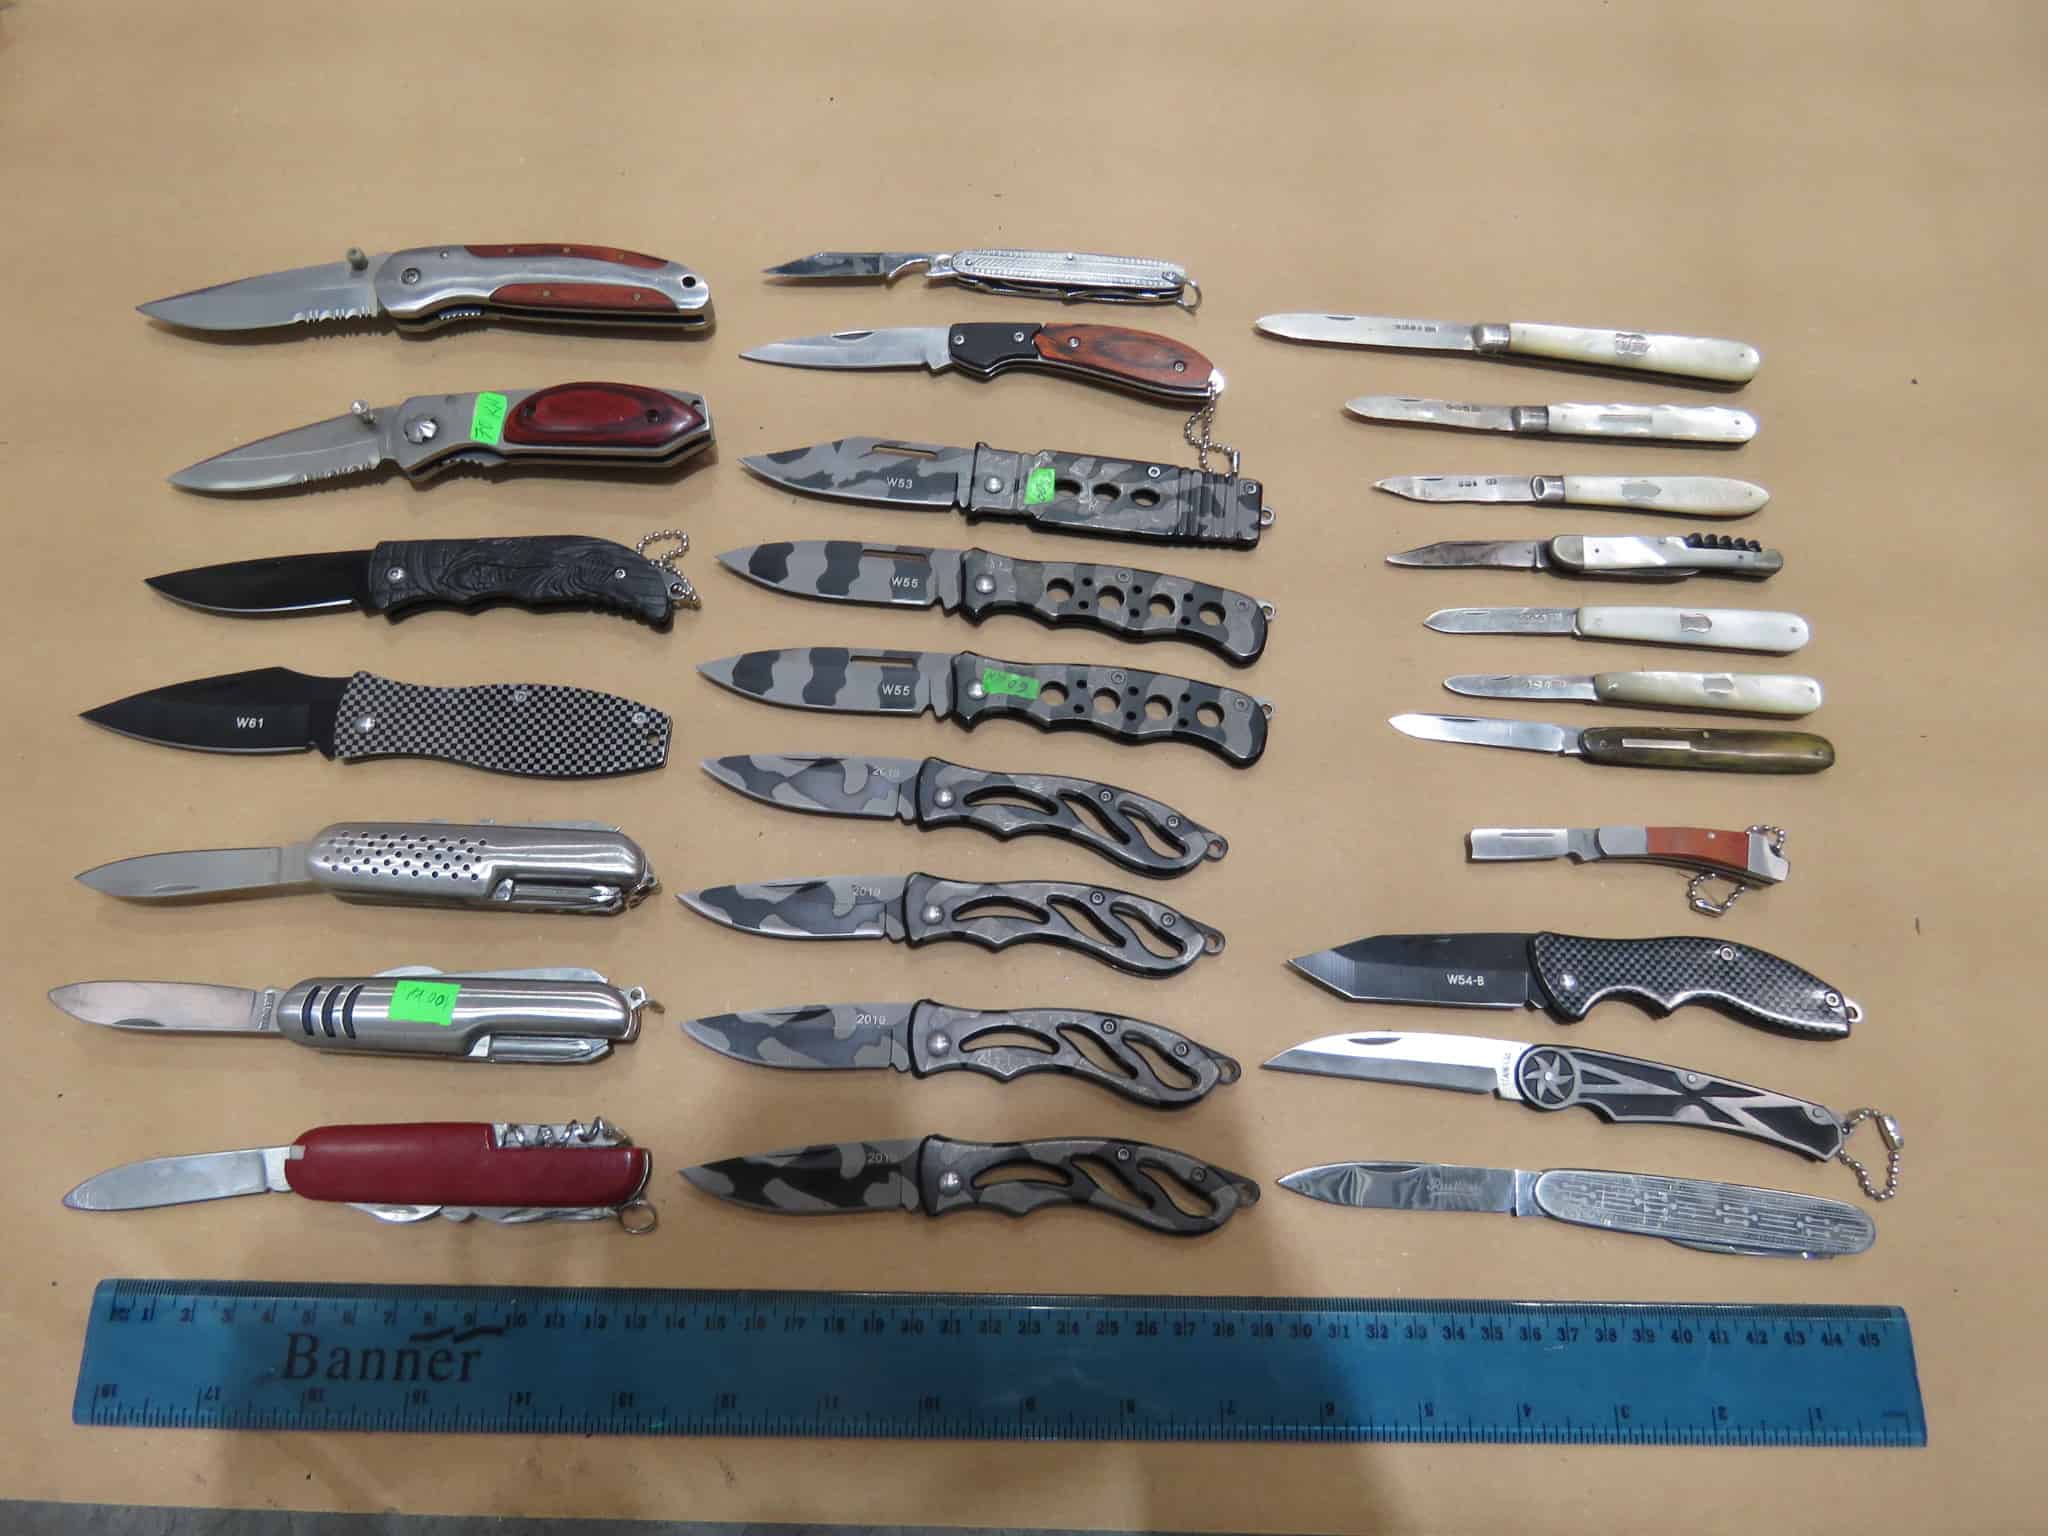 Investigators found the knives in Ramadani's boot - which he'd planned to sell in his Old Kent Road shop